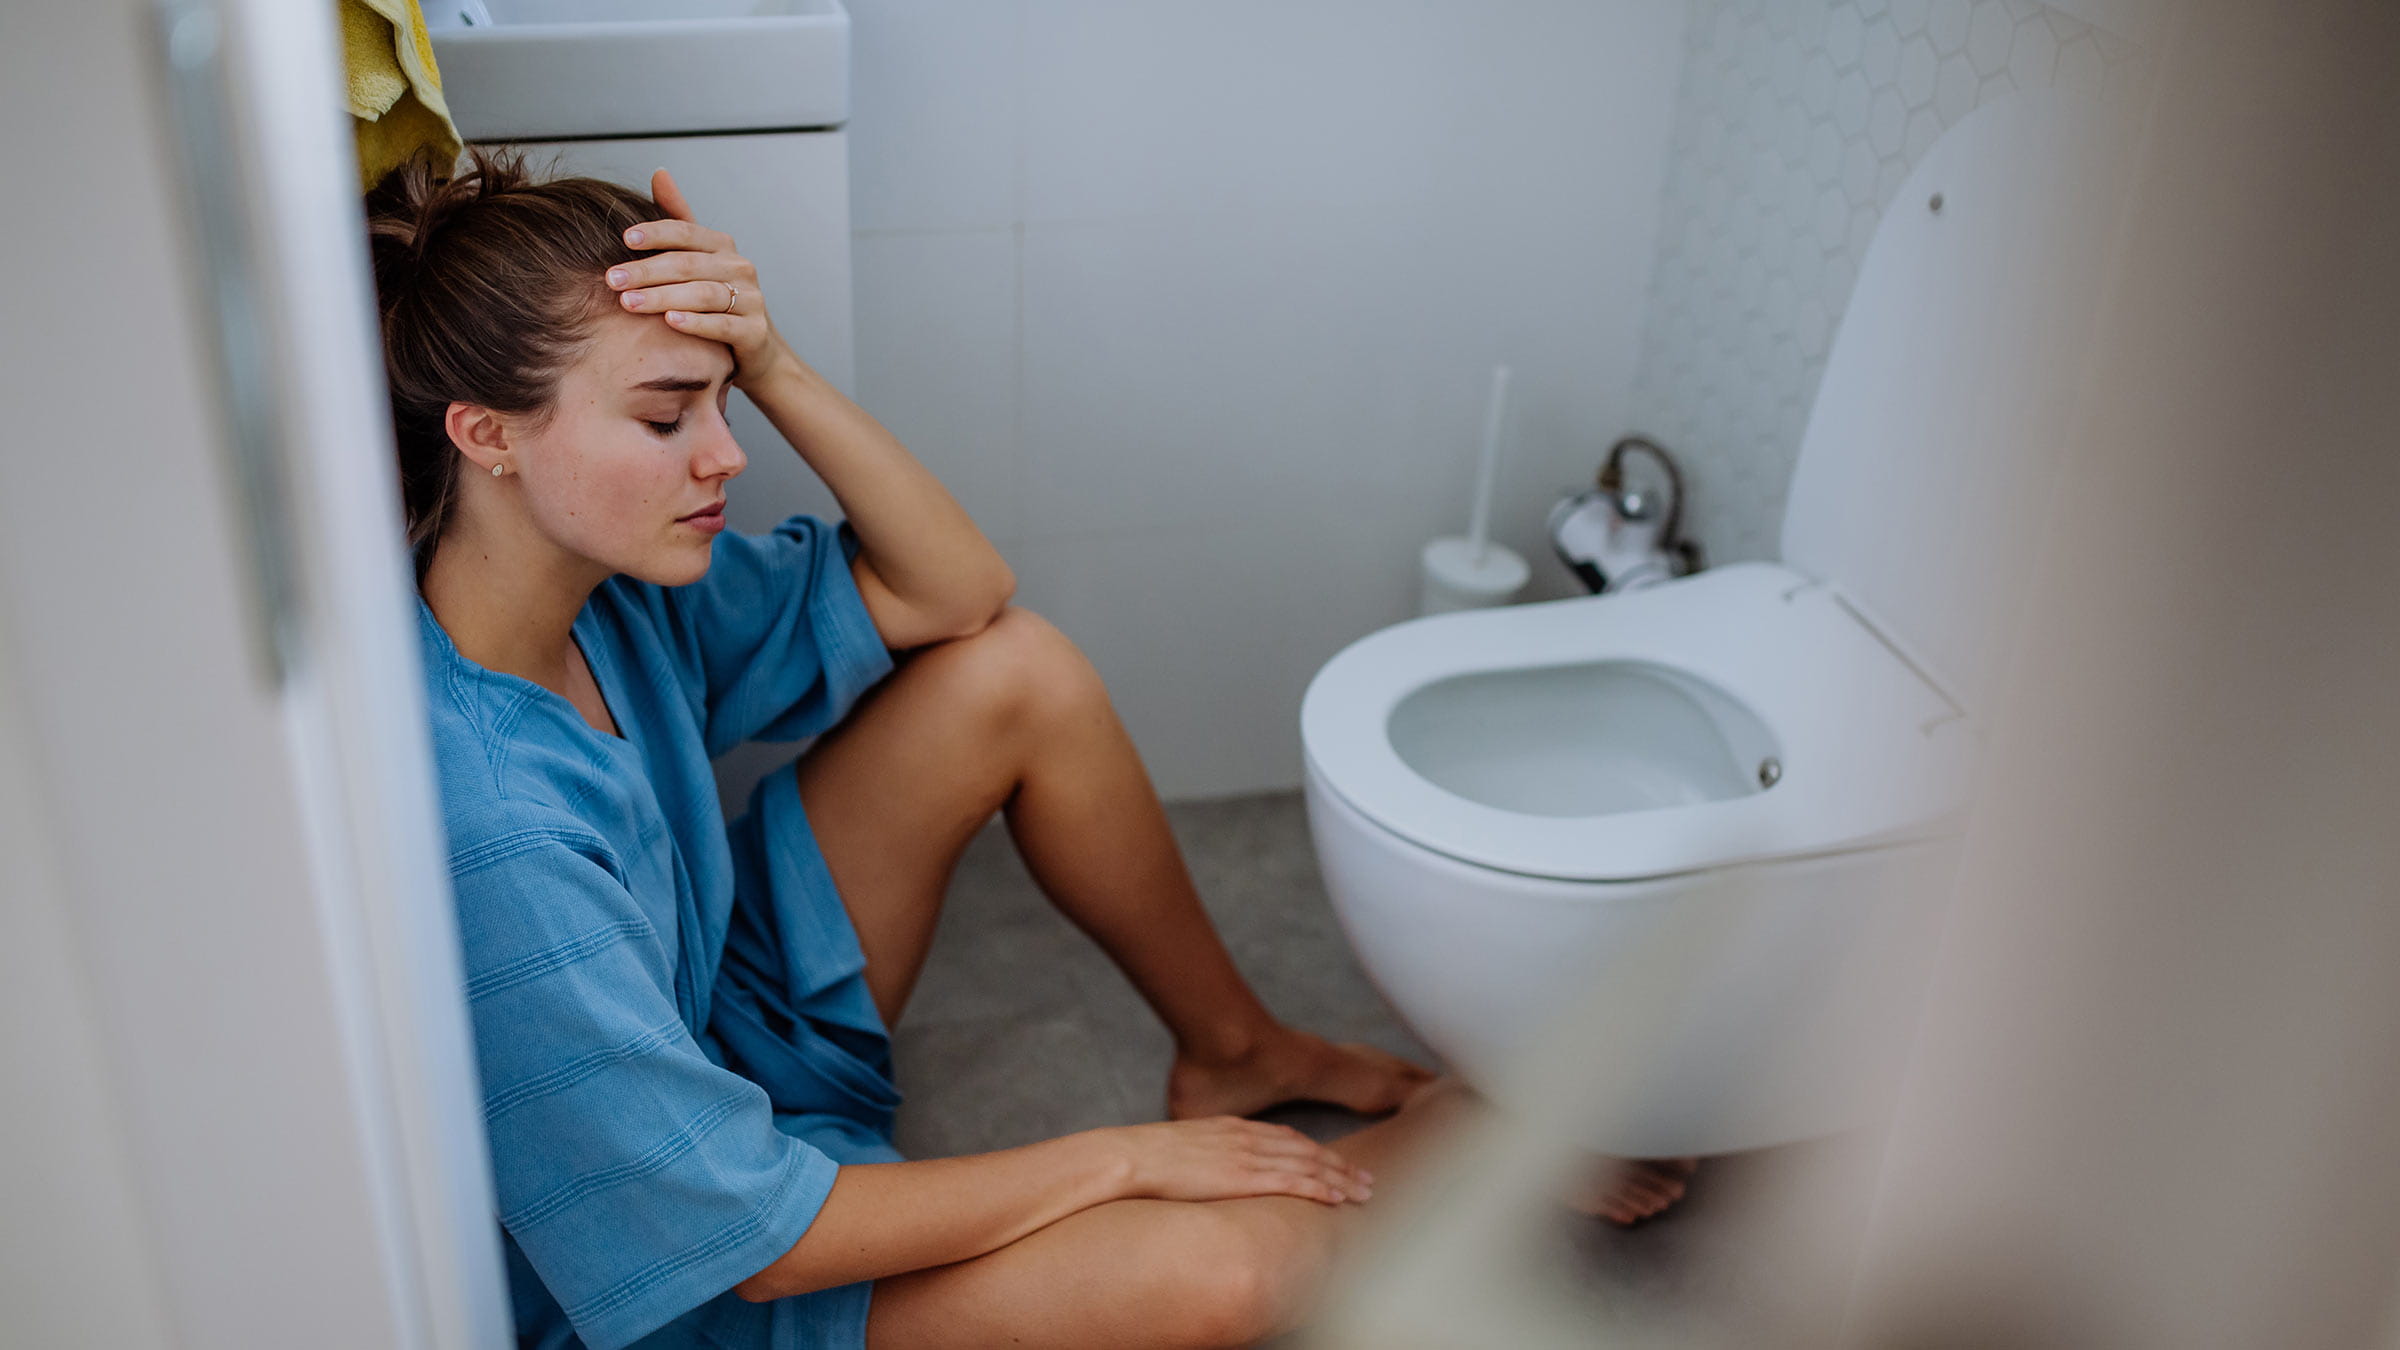 Morning sickness: Is it a sign of good health?